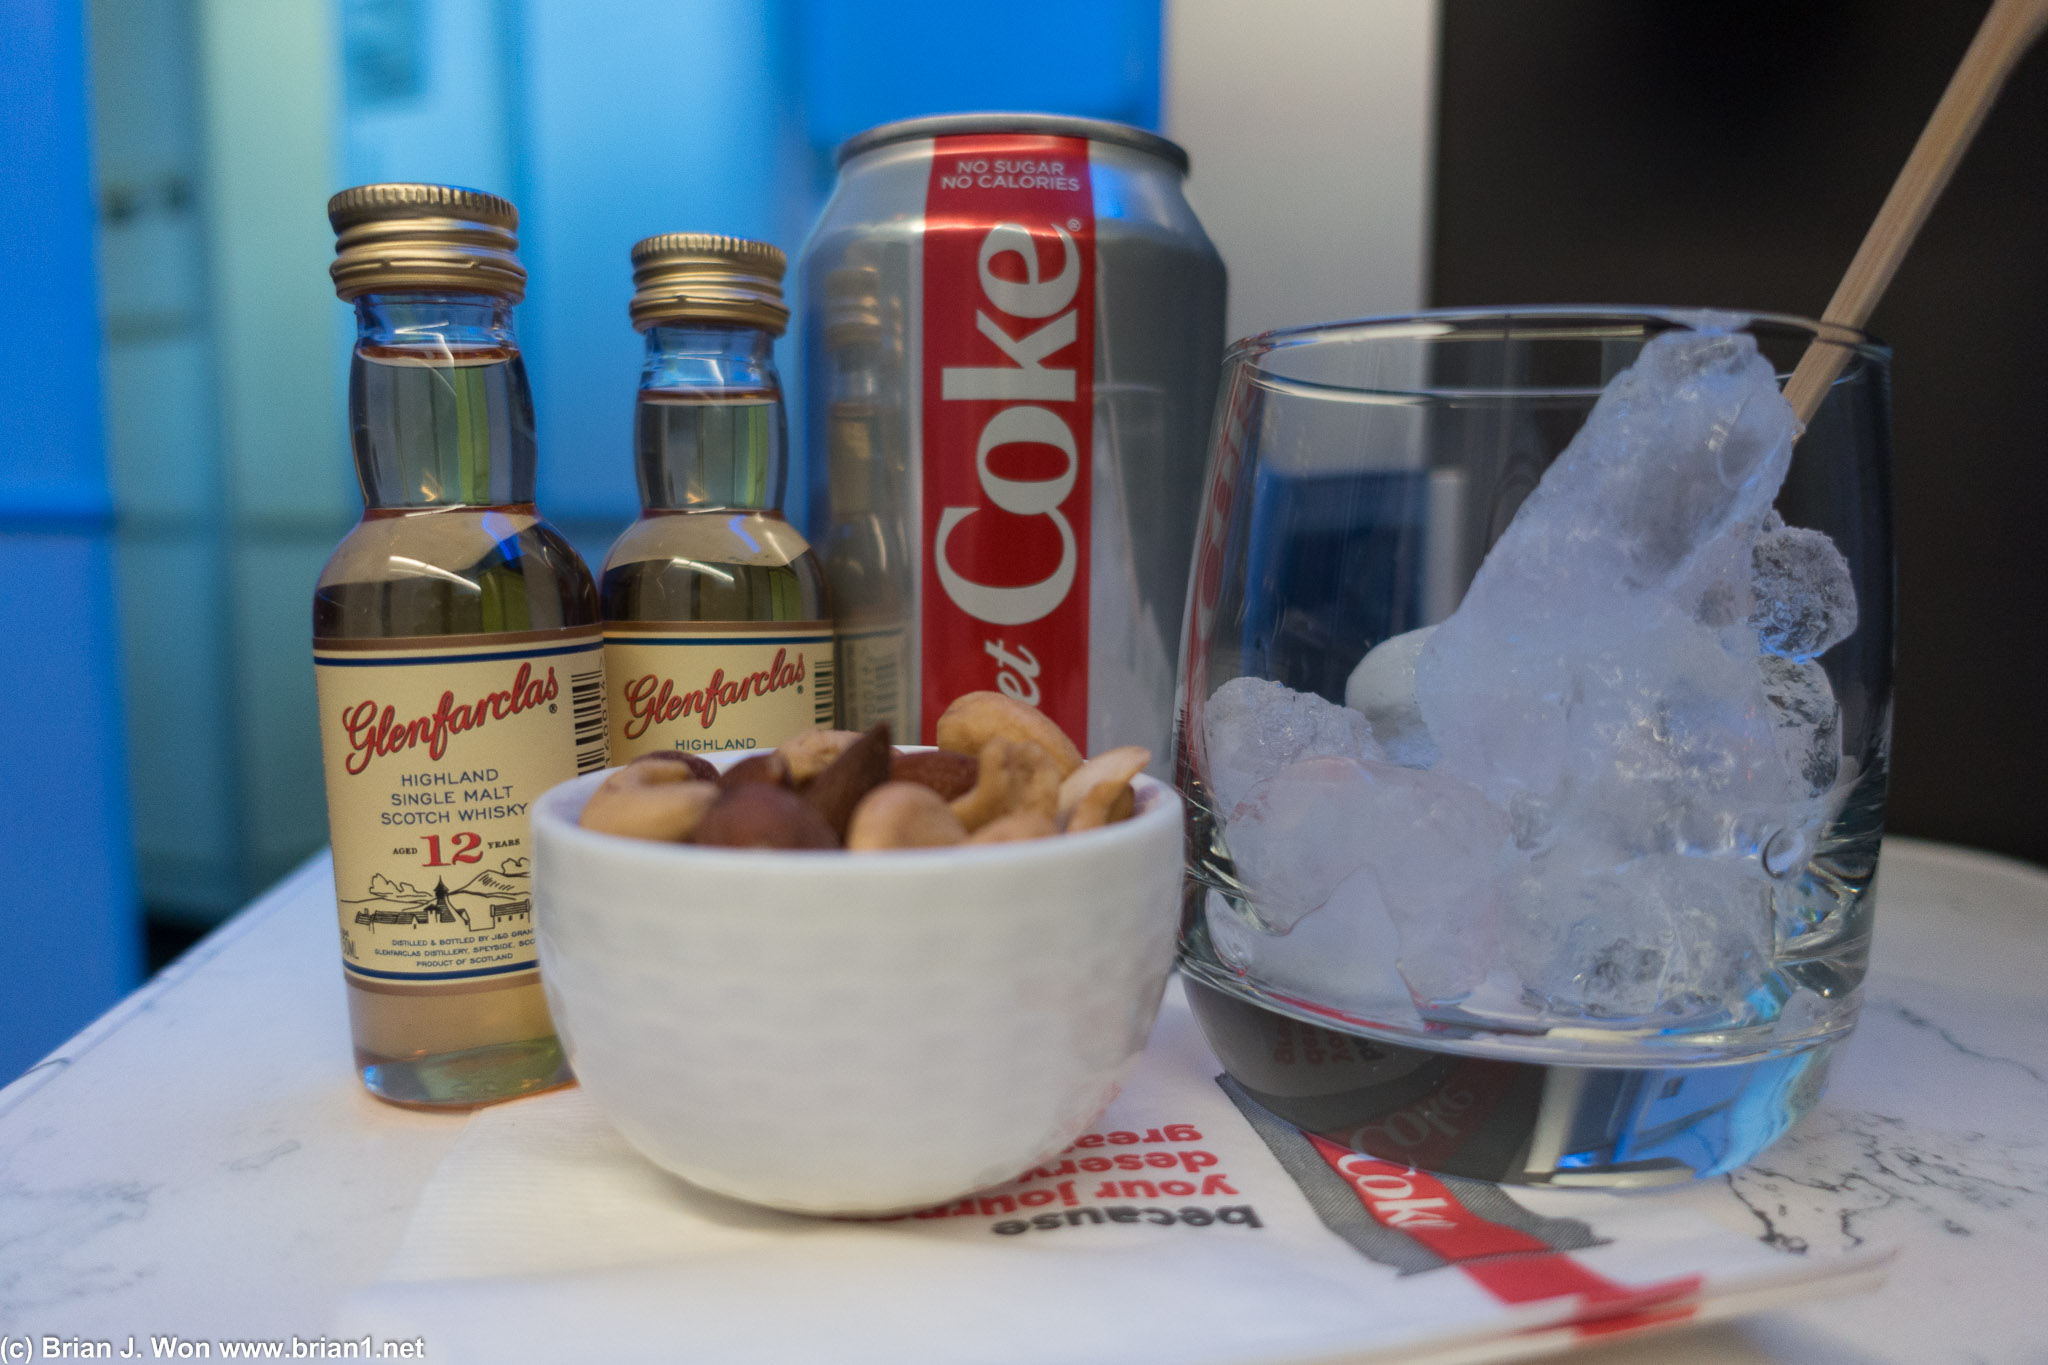 Given the food fails so far today, going straight to warm nuts and scotch.